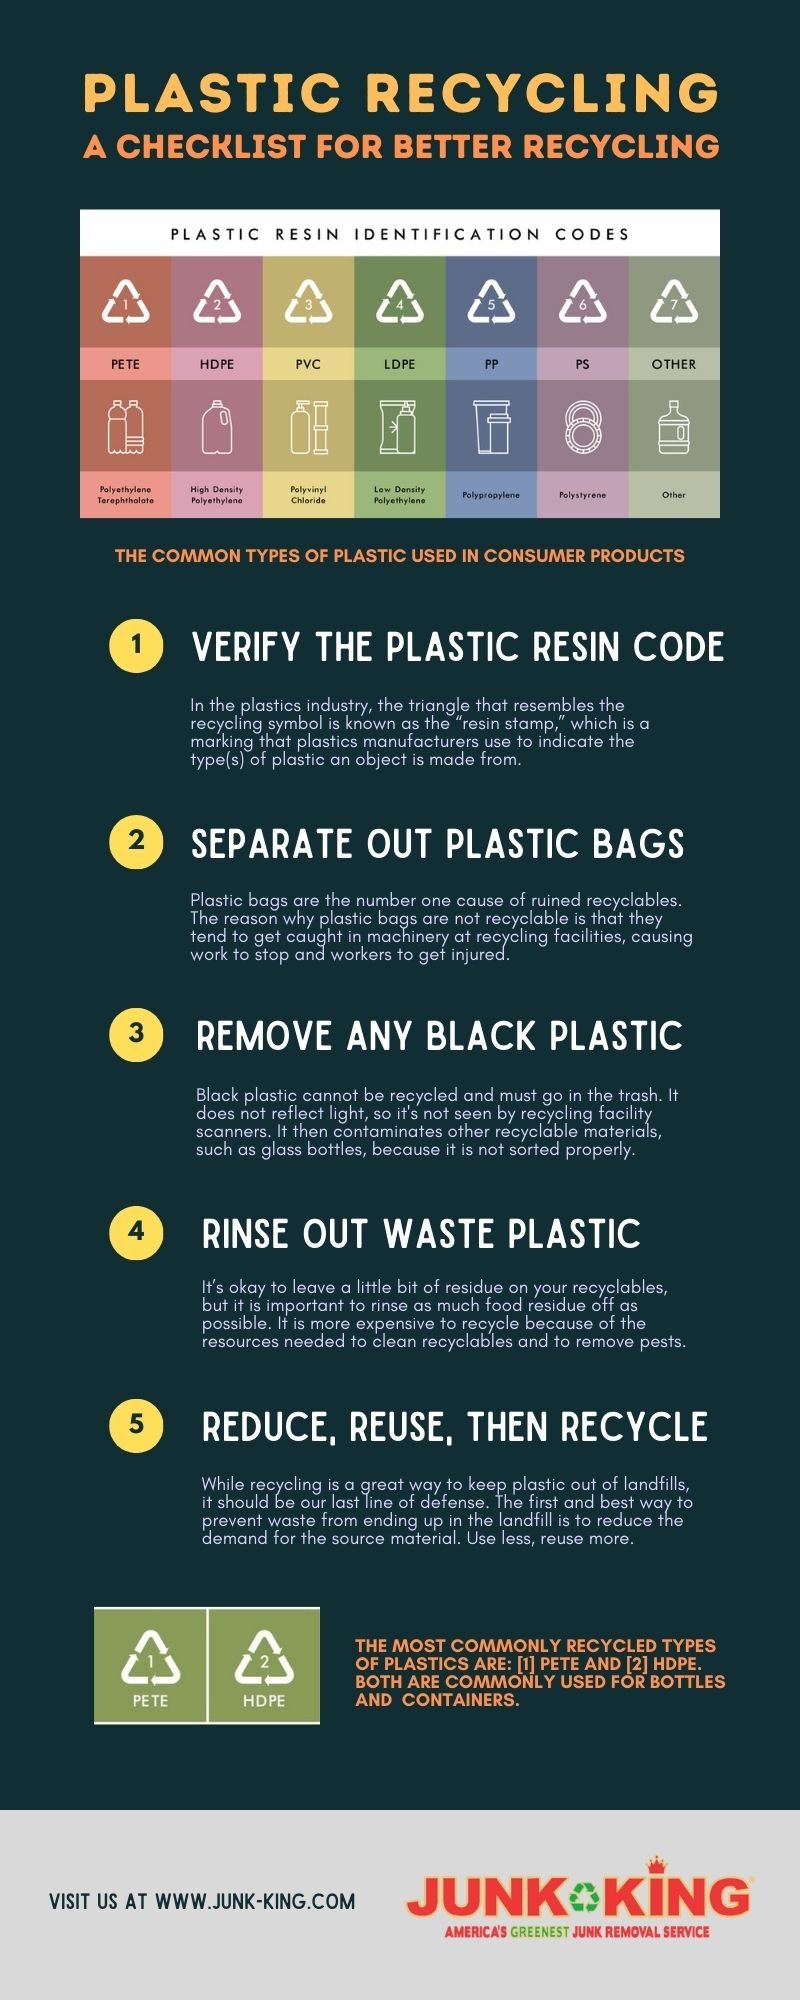 5-tips-for-better-plastic-recycling-1